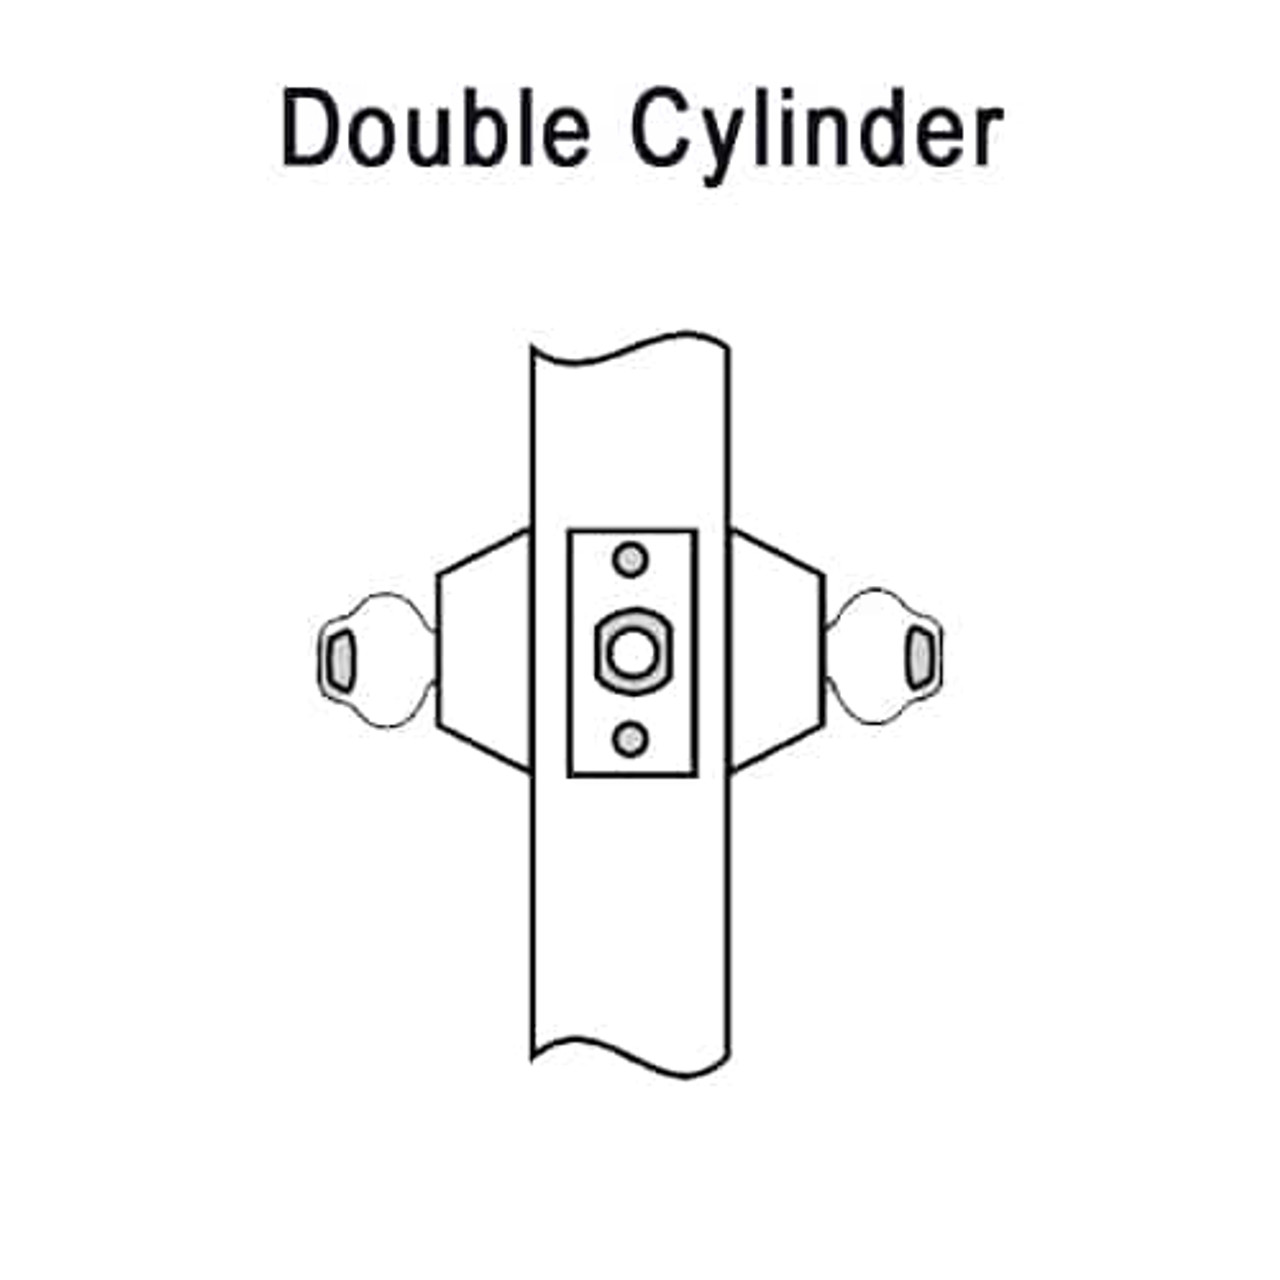 DL3212-606 Corbin DL3200 Series Cylindrical Deadlocks with Double Cylinder in Satin Brass